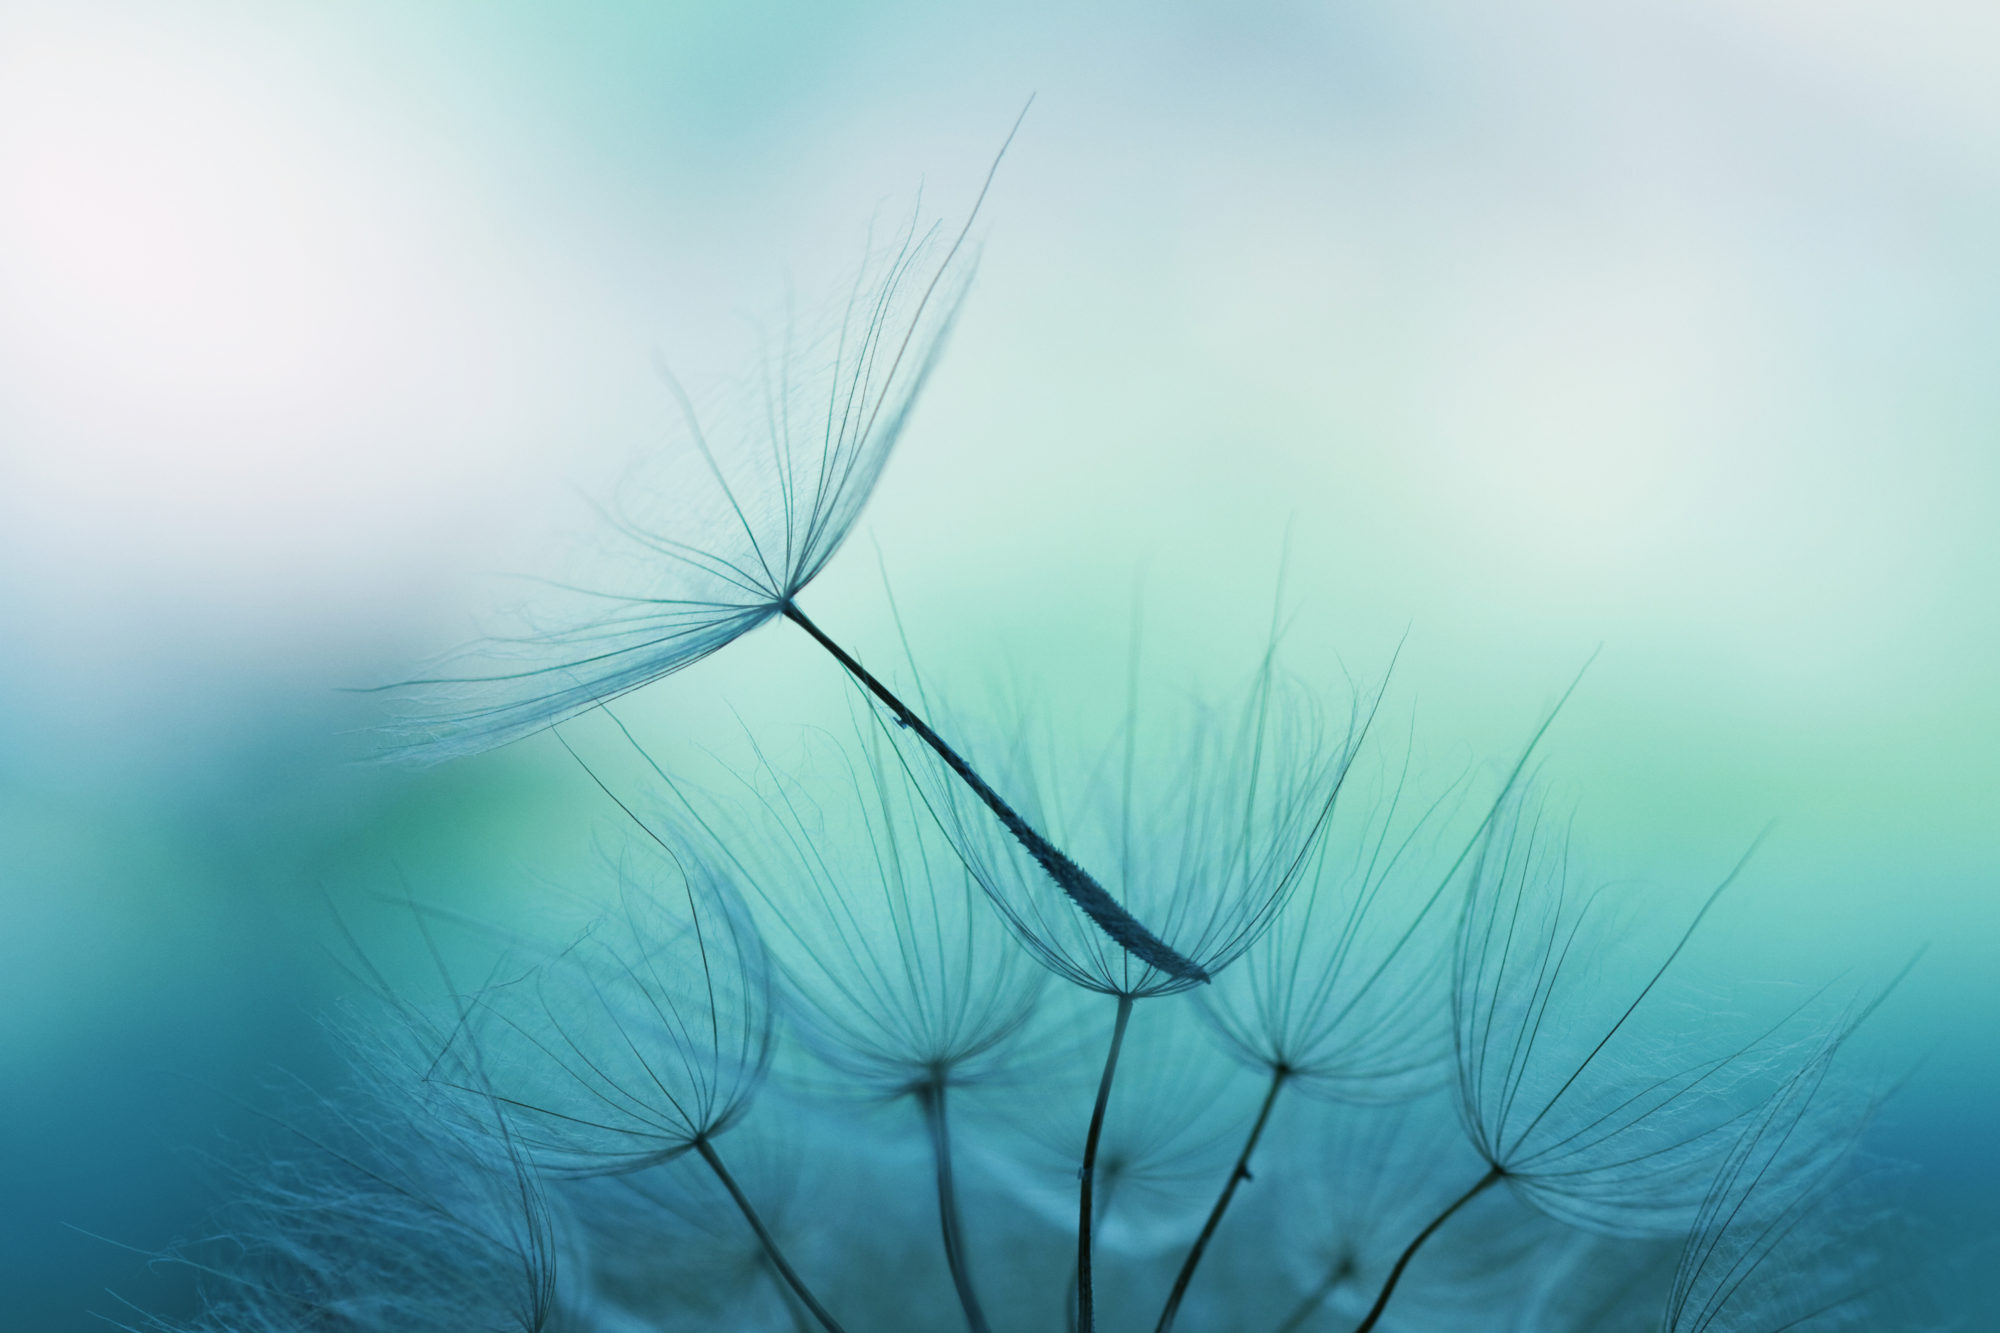 An image of dandelion seed shallow focus